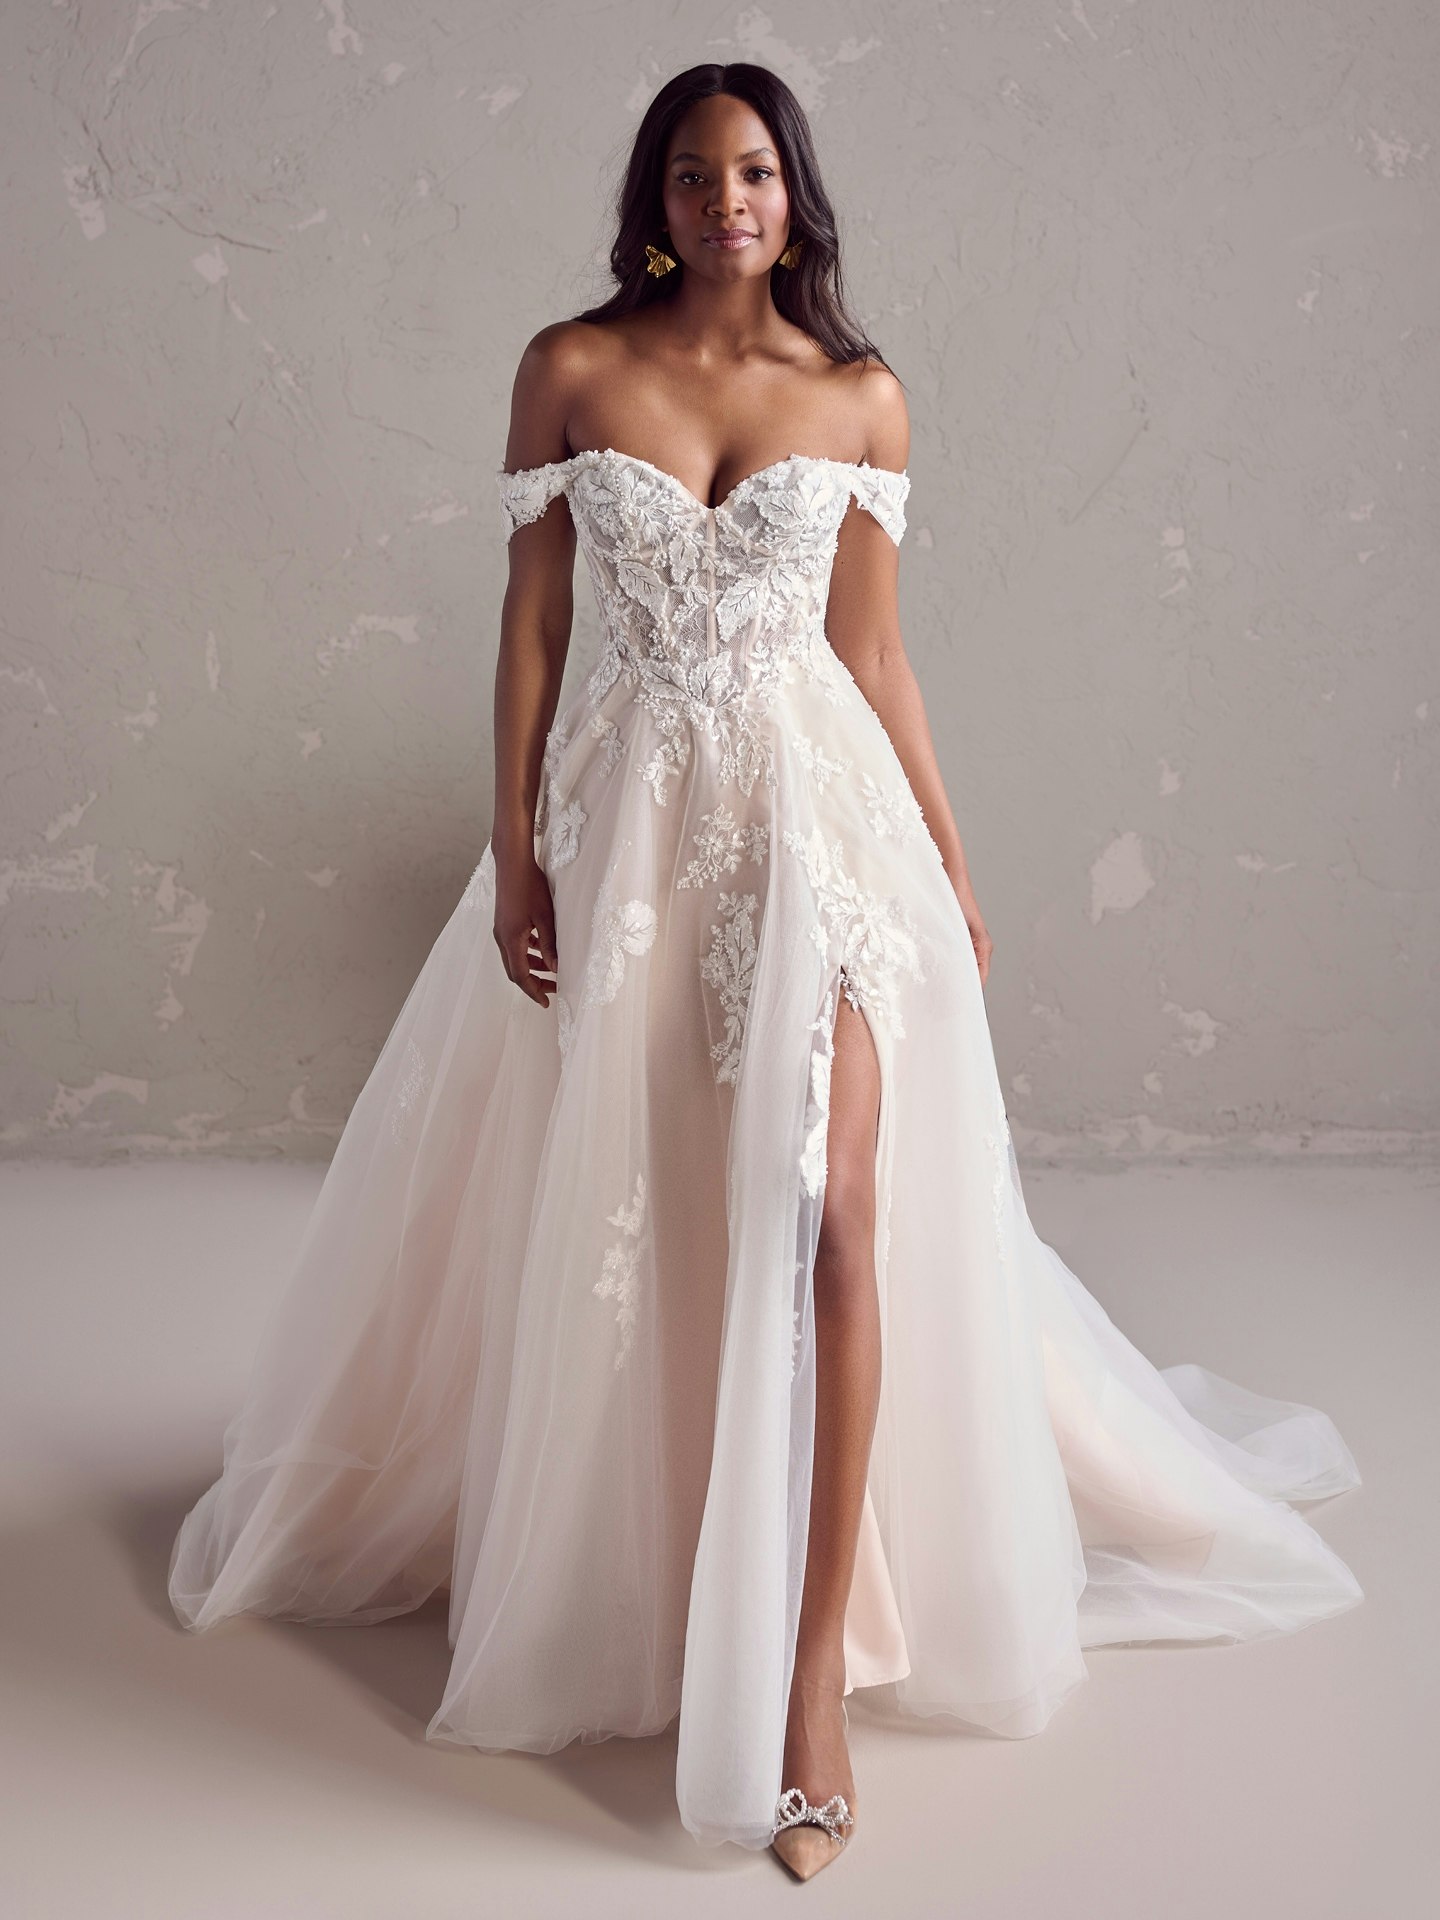 Wedding dress FRONTERA Product for Sale at NY City Bride